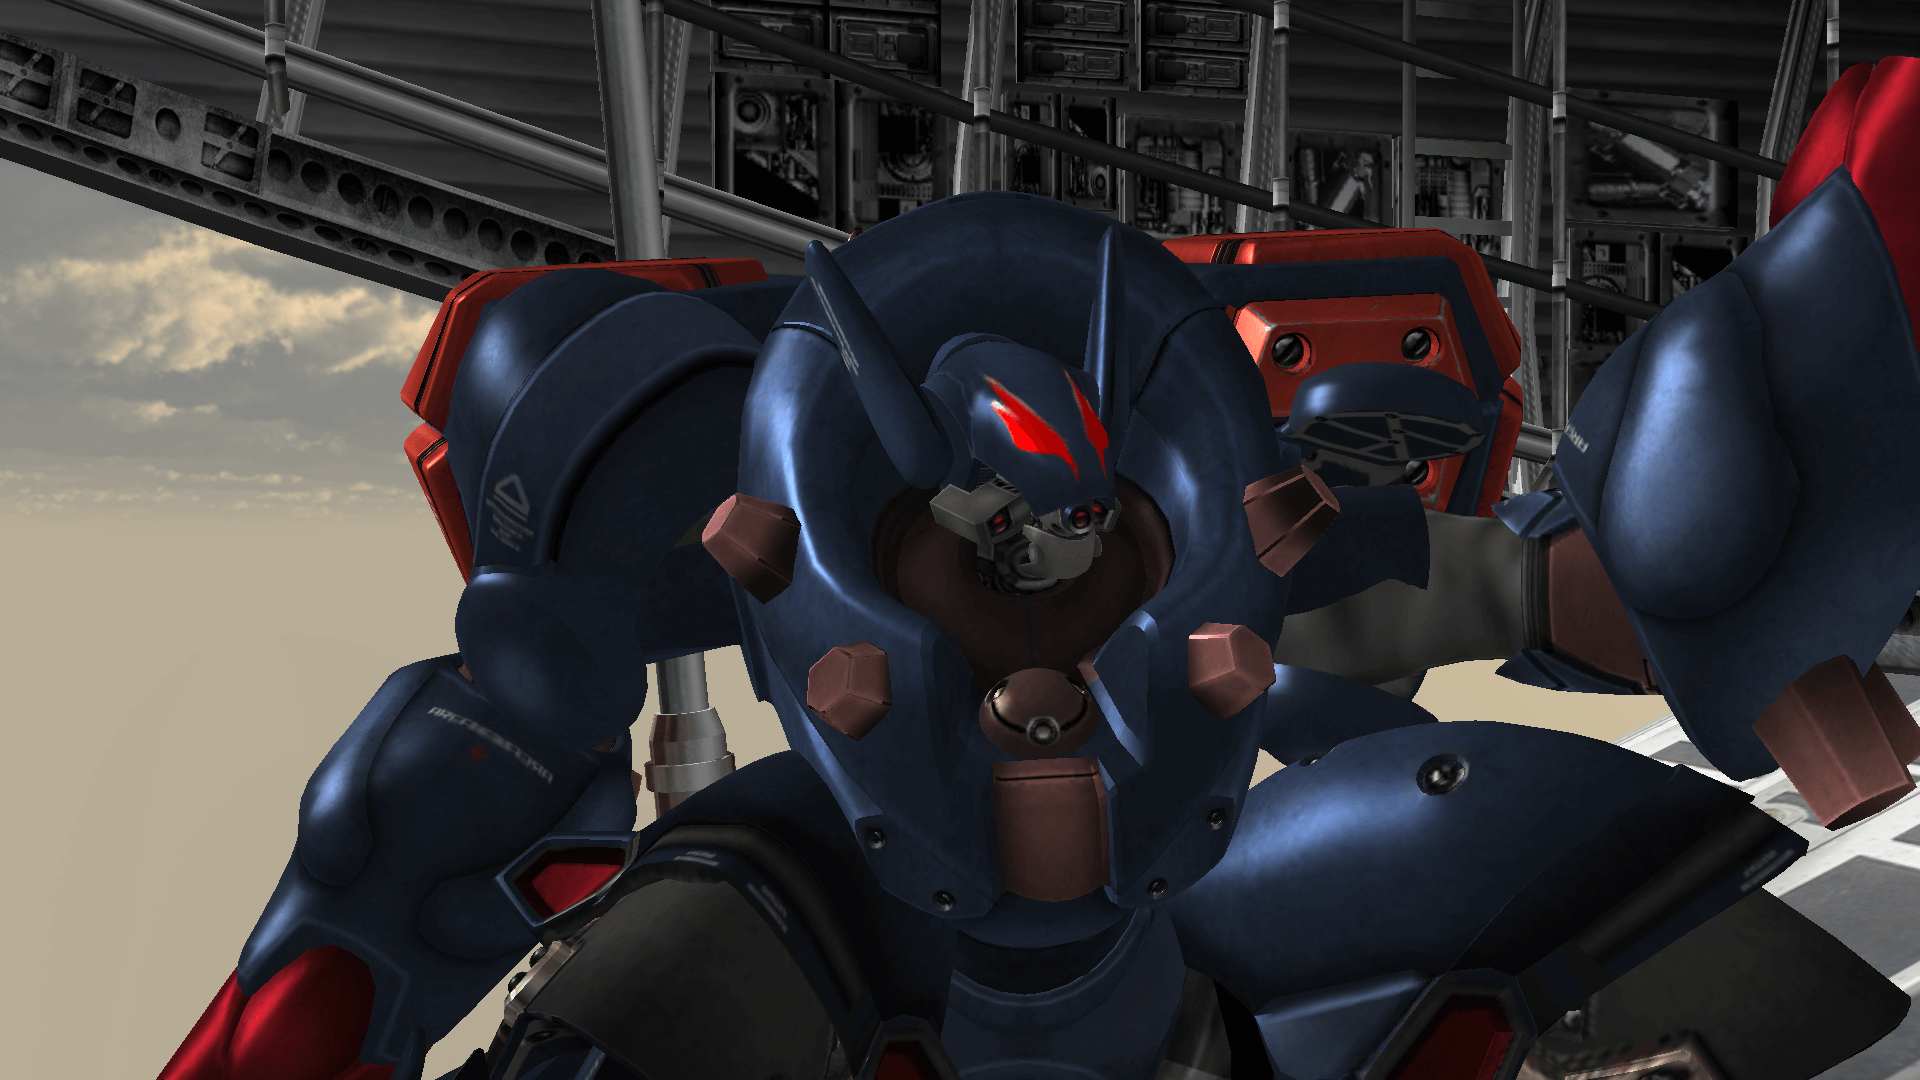 http://www.cosmocover.com/wp-content/uploads/2018/06/Metal-Wolf-Chaos-Screen-1.png